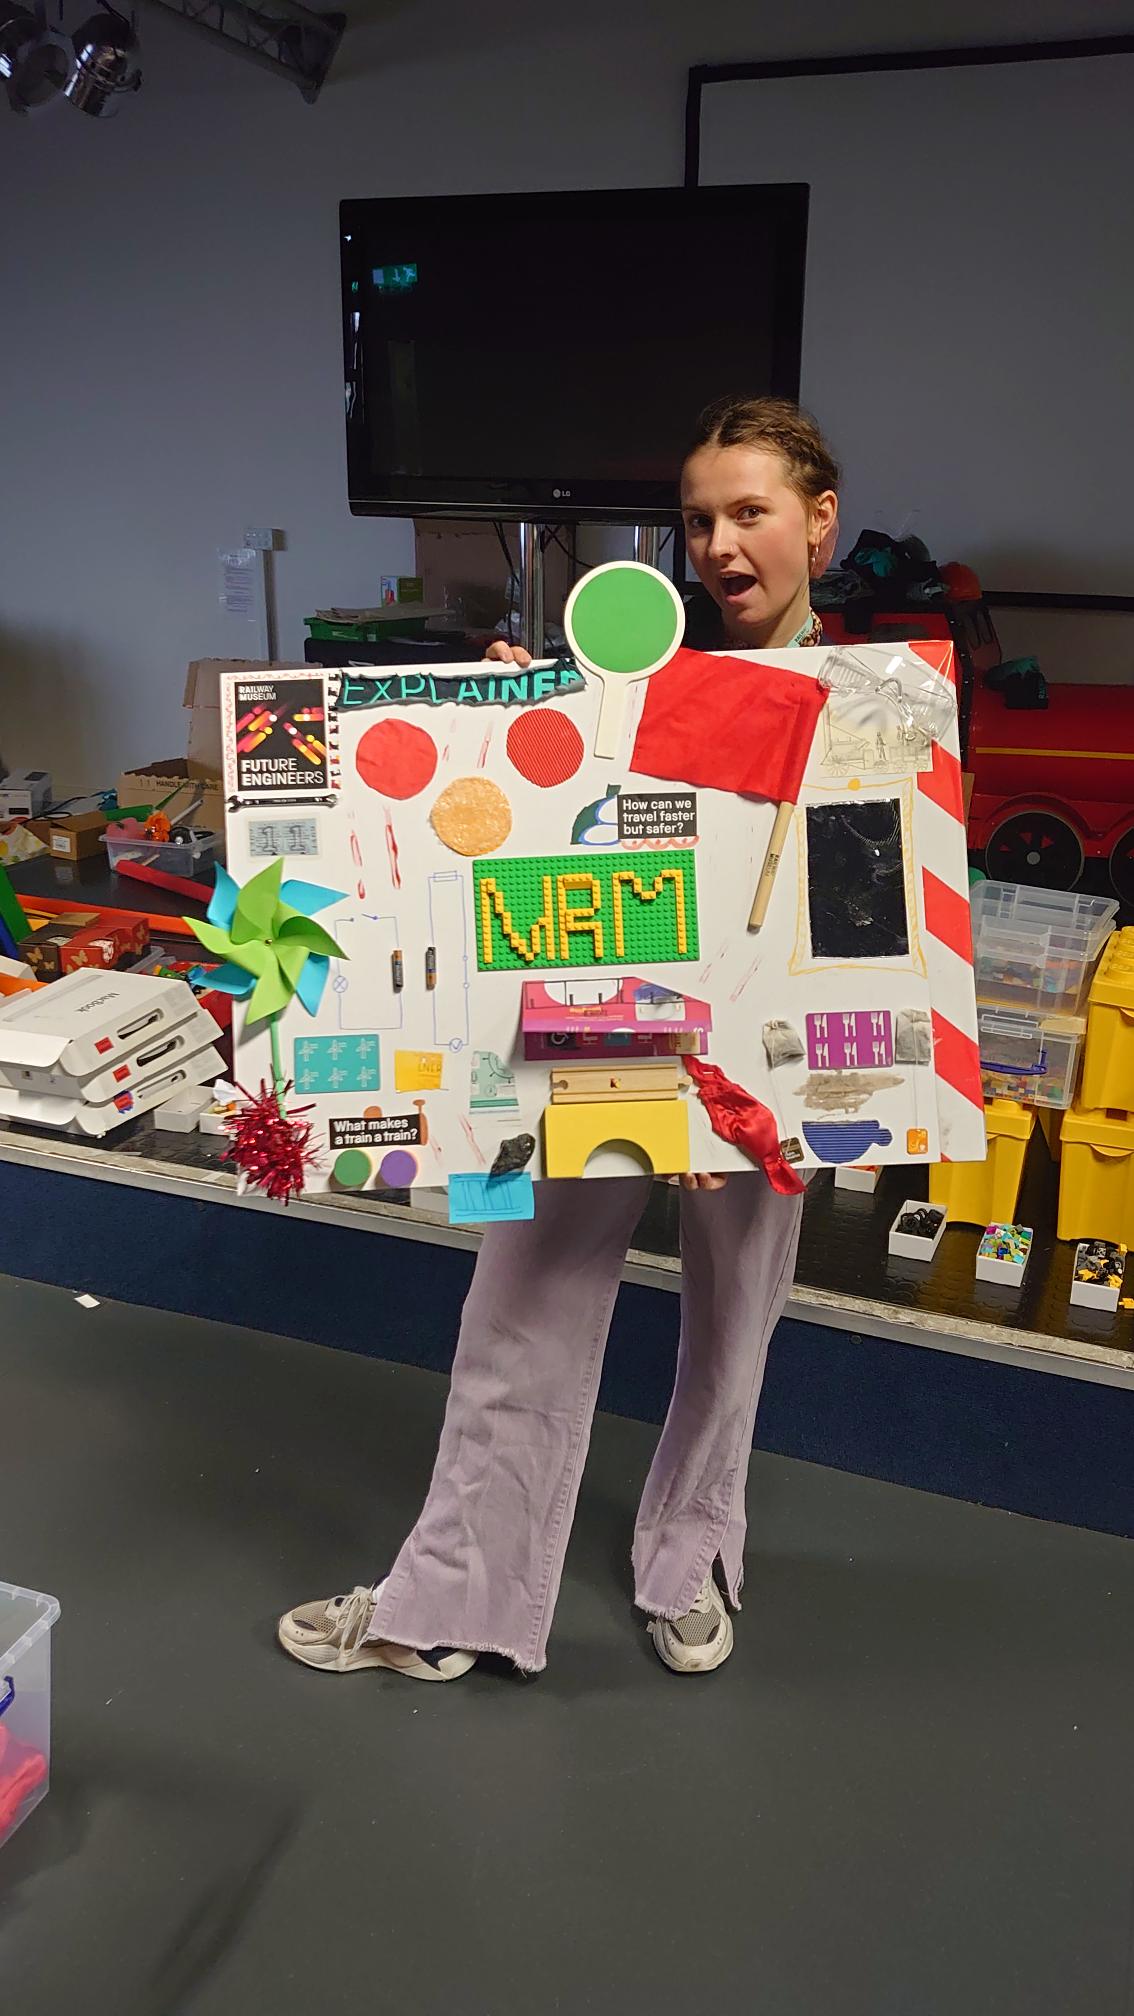 A young woman wearing purple trousers and her hair in plaits. She is holding an NRM Sensescape, a A1 moodboard with lego, bridges, paper windmills, tea bags, and flags